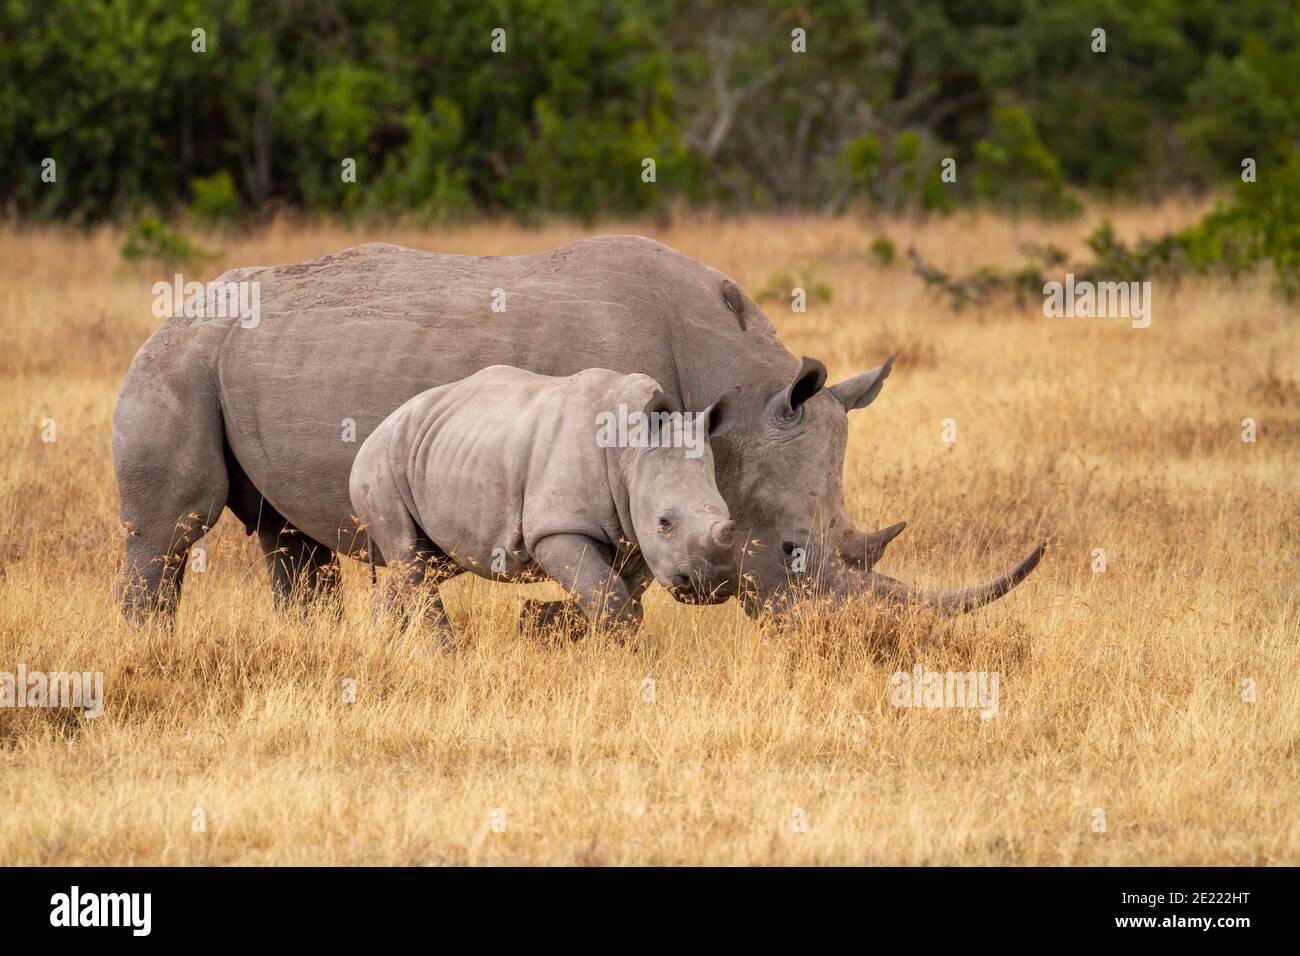 South white rhinoceros mother with baby calf move on dry grass in Ol Pejeta Conservancy, Kenya. Near threatened African wildlife in safari destination Stock Photo